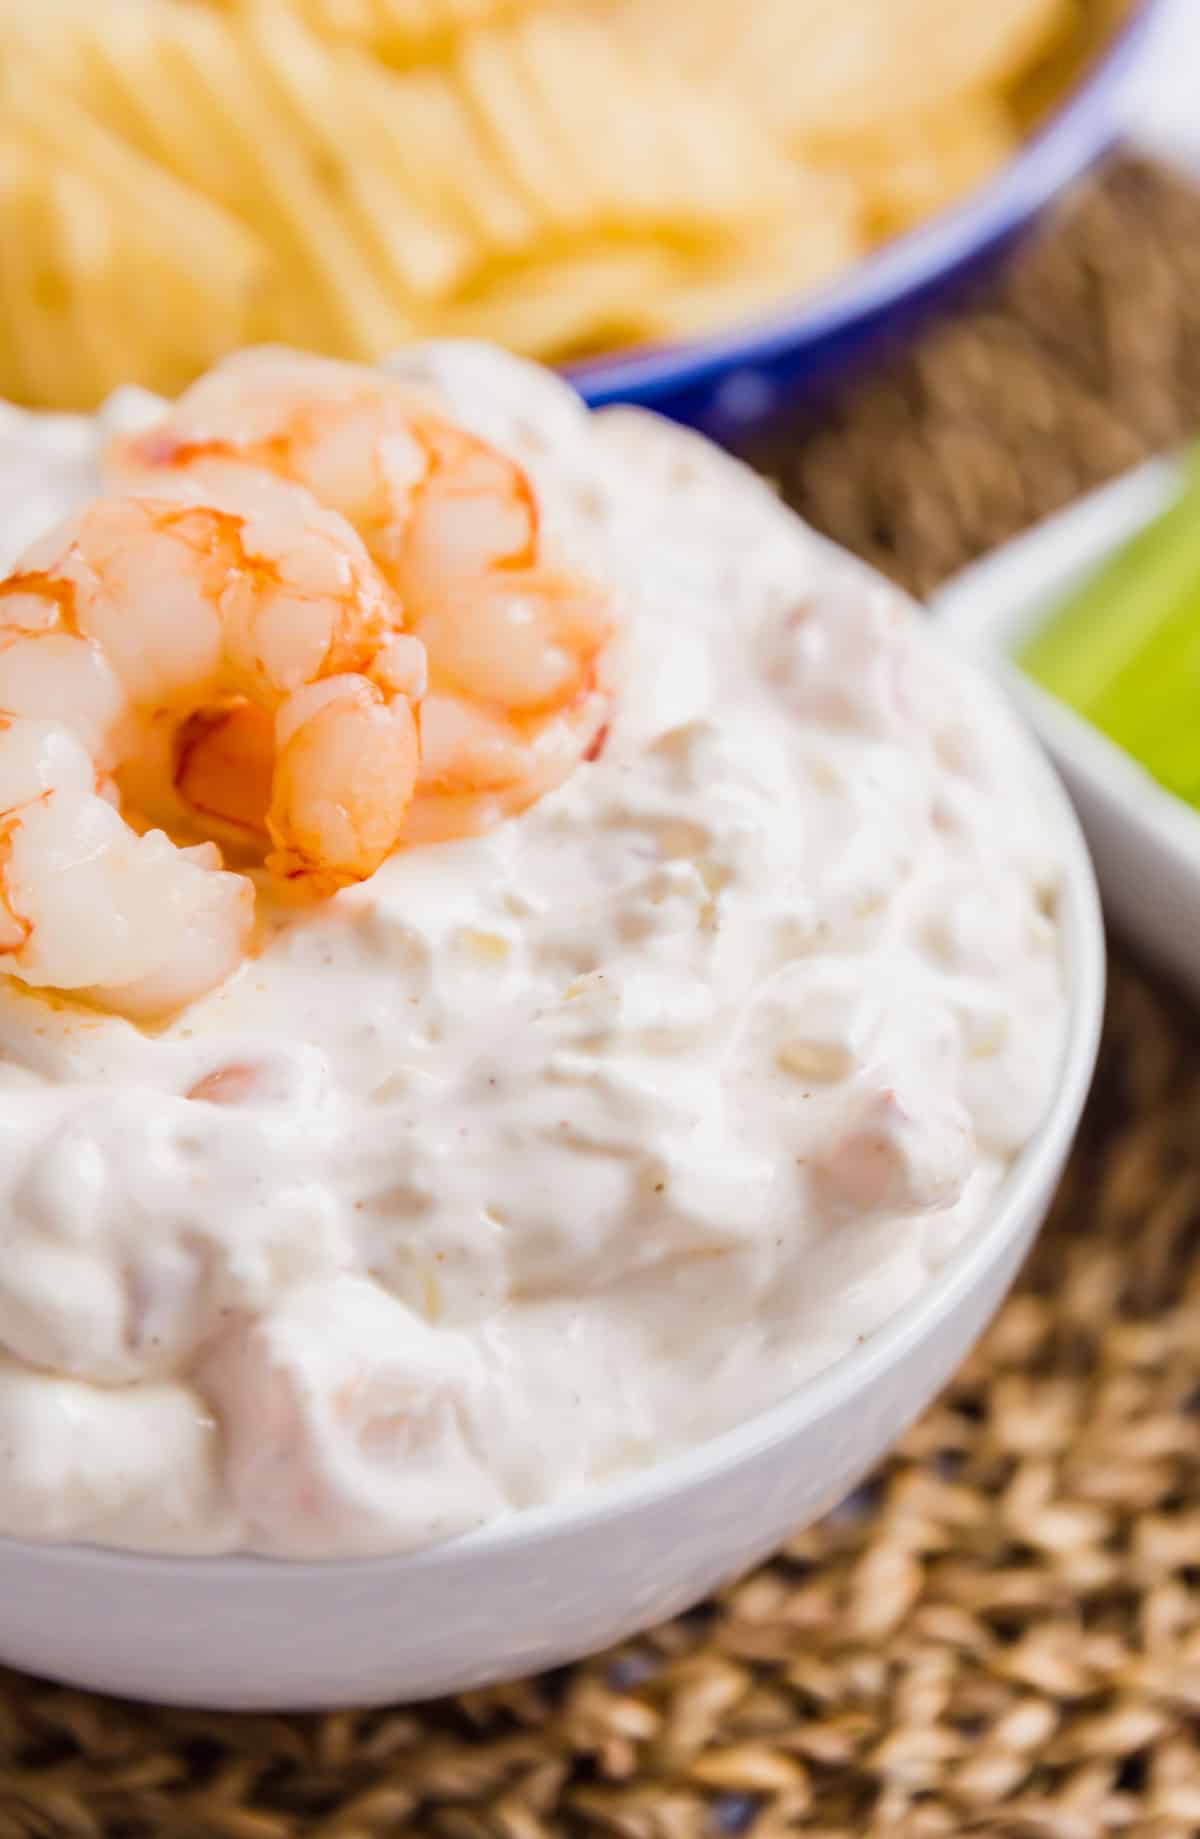 A very close up image of shrimp dip in a white bowl.